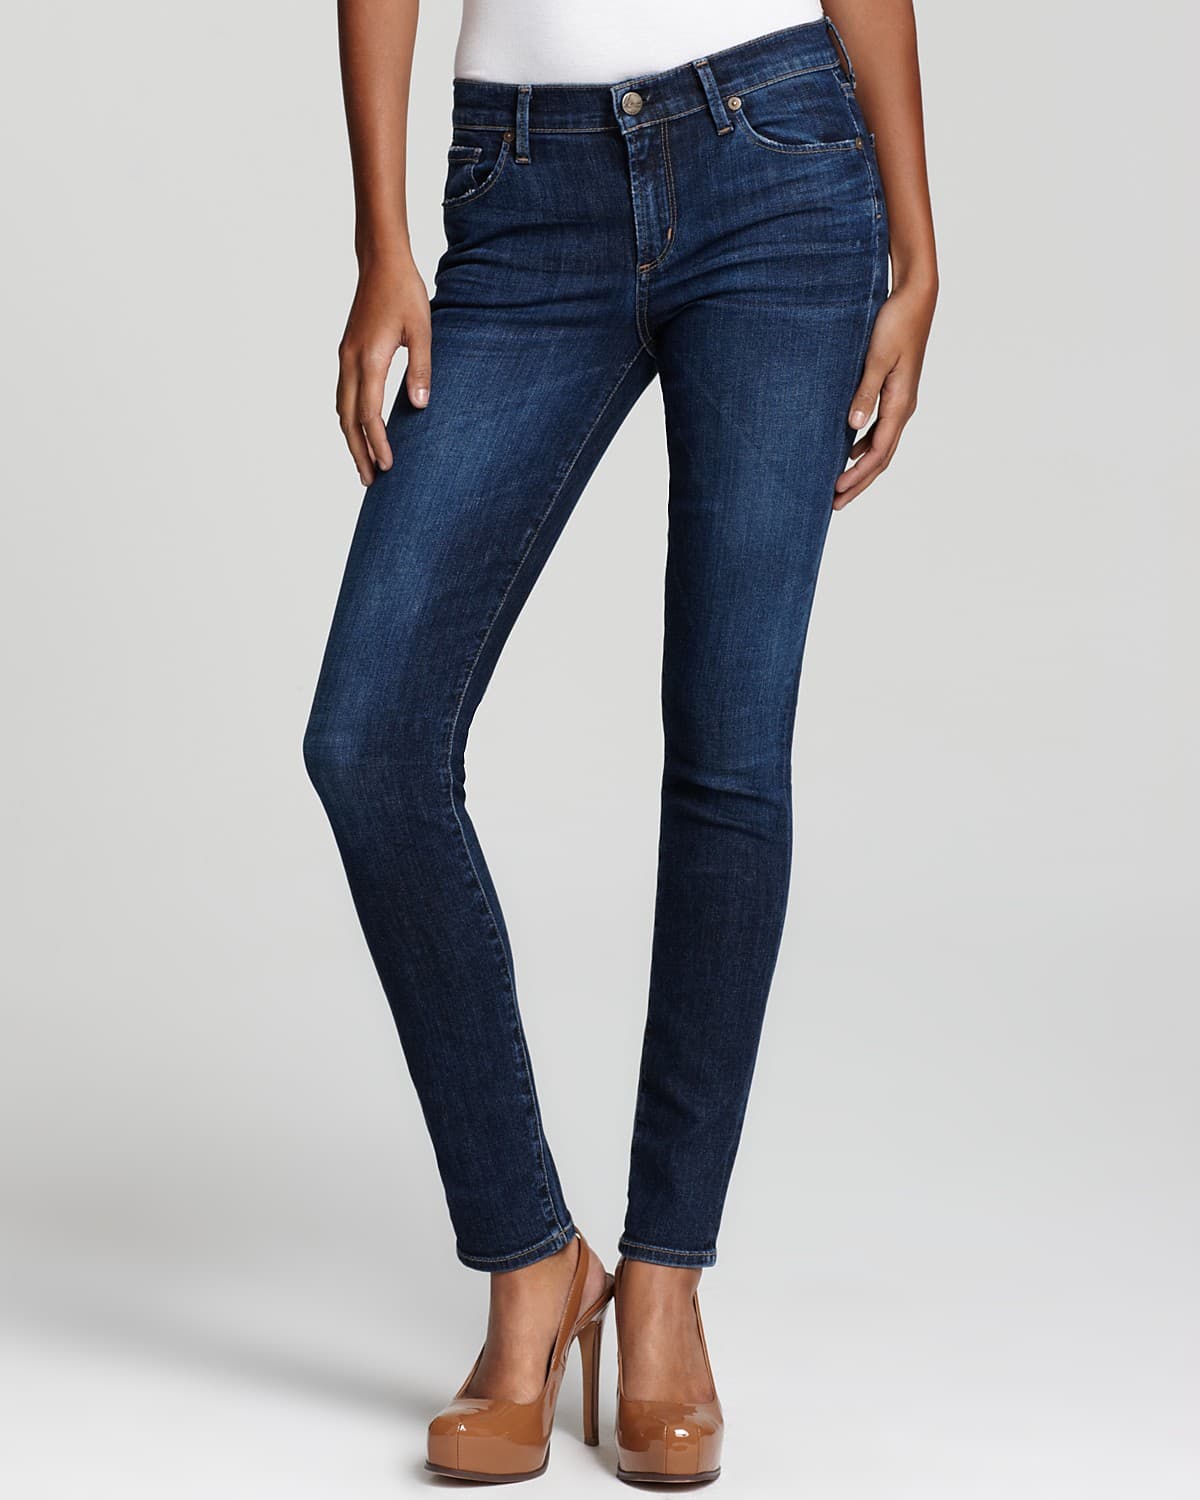 Image of Random Best High-End Expensive Jeans For Women